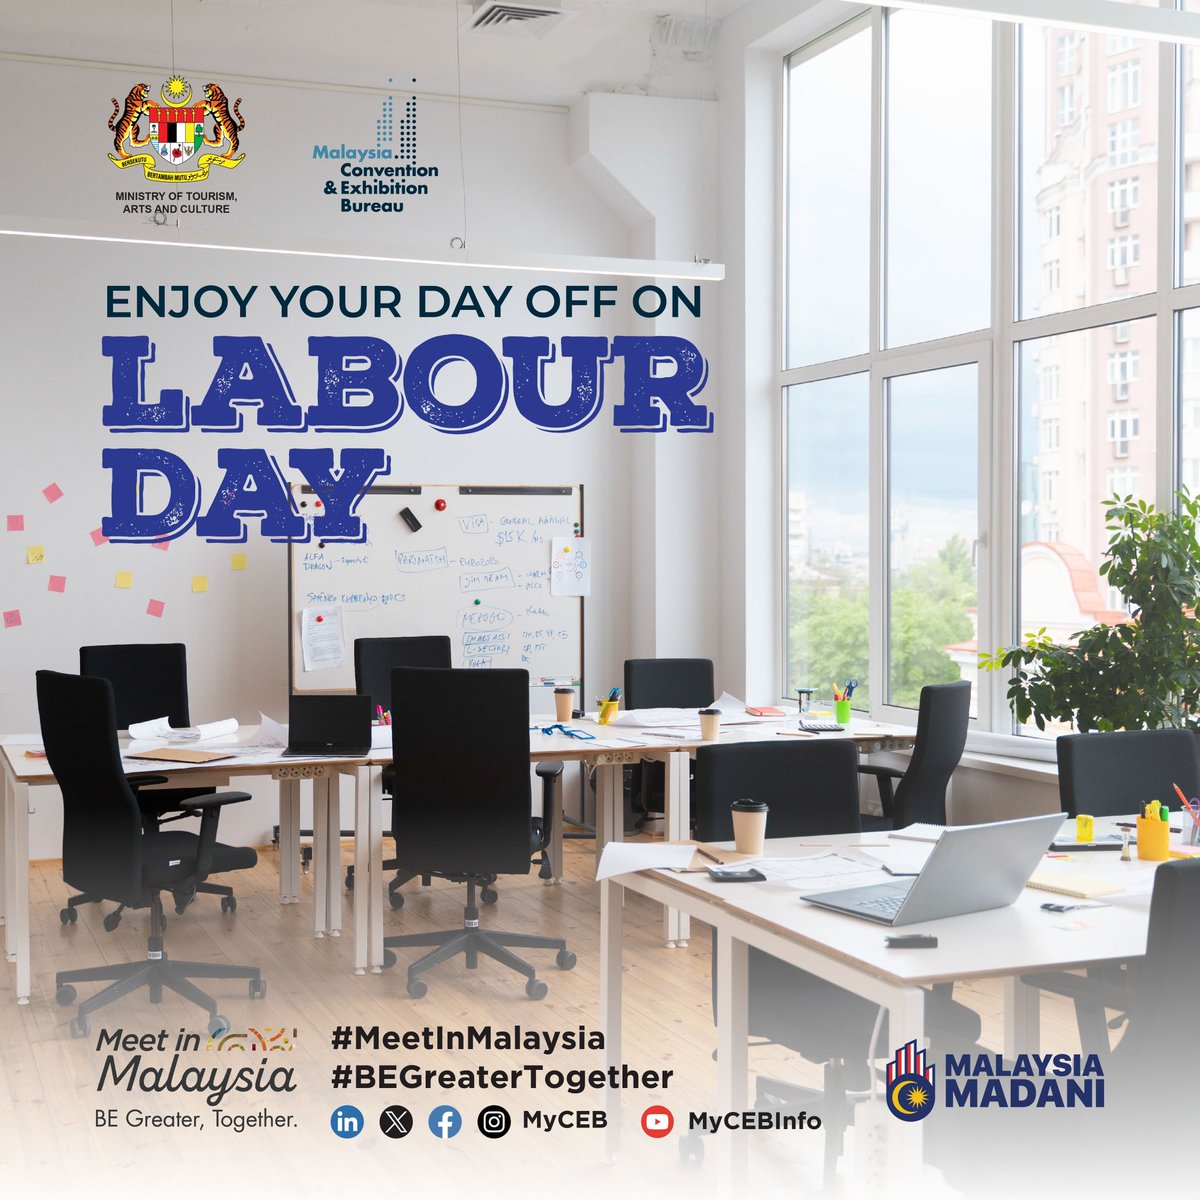 Here's to the relentless pursuit of success and the triumph of hard work. Happy Labour Day from all of us at MyCEB!

#MyCEB #MyMOTAC #MeetInMalaysia #BEGreaterTogether #BusinessEvents